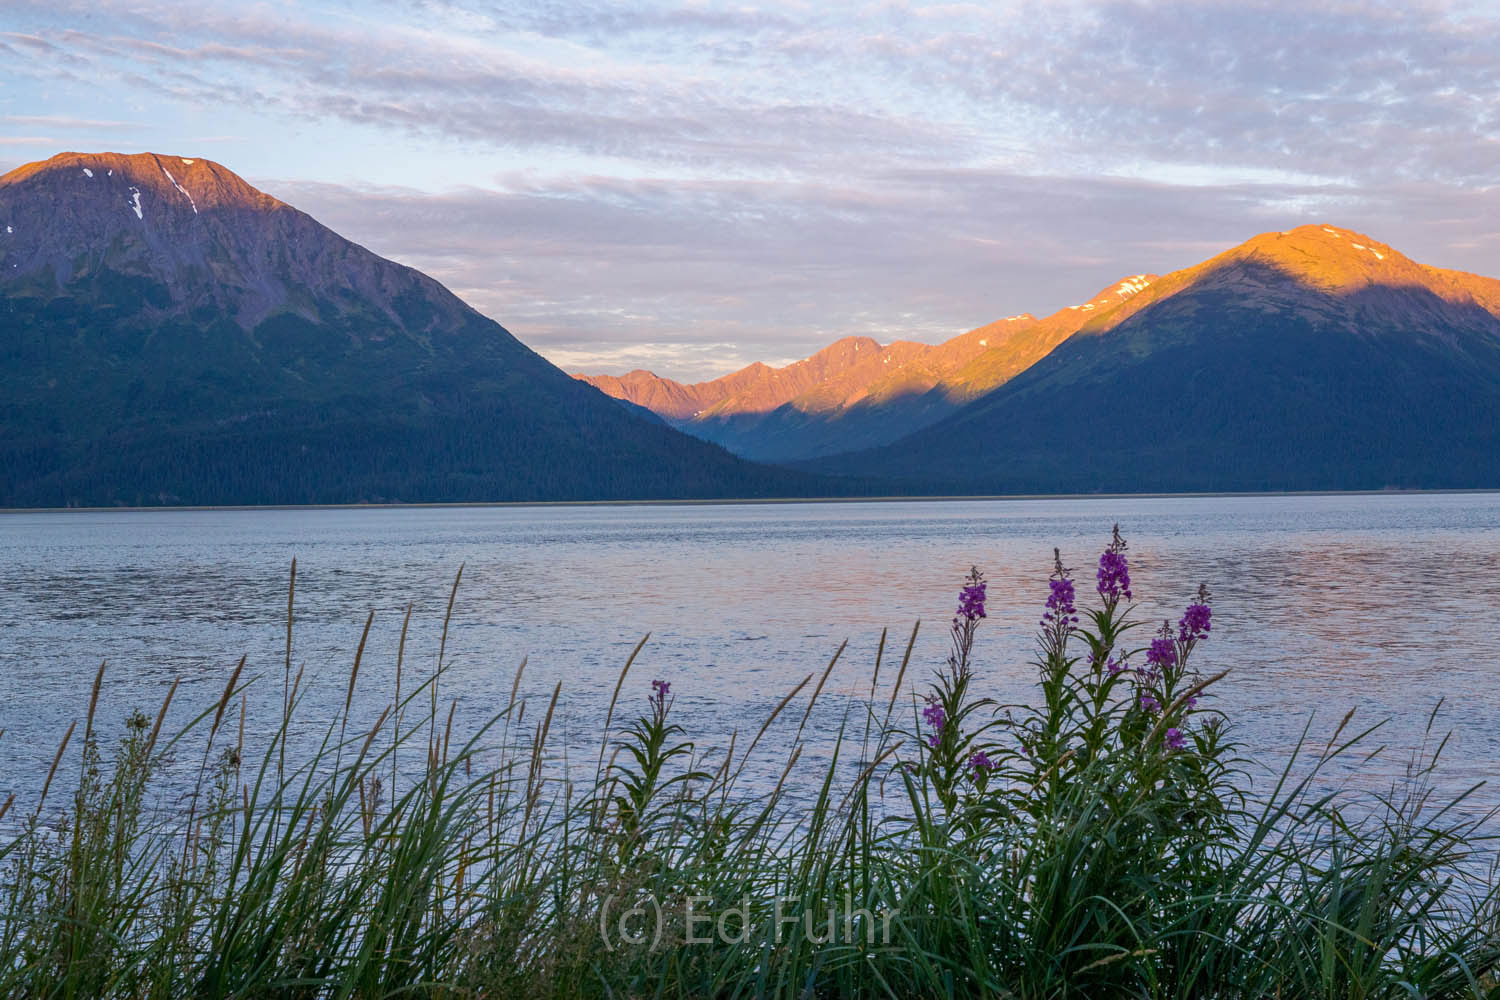 Sunrise tips the peaks across Turnagain Arm with a bank of fireweed on the shore.